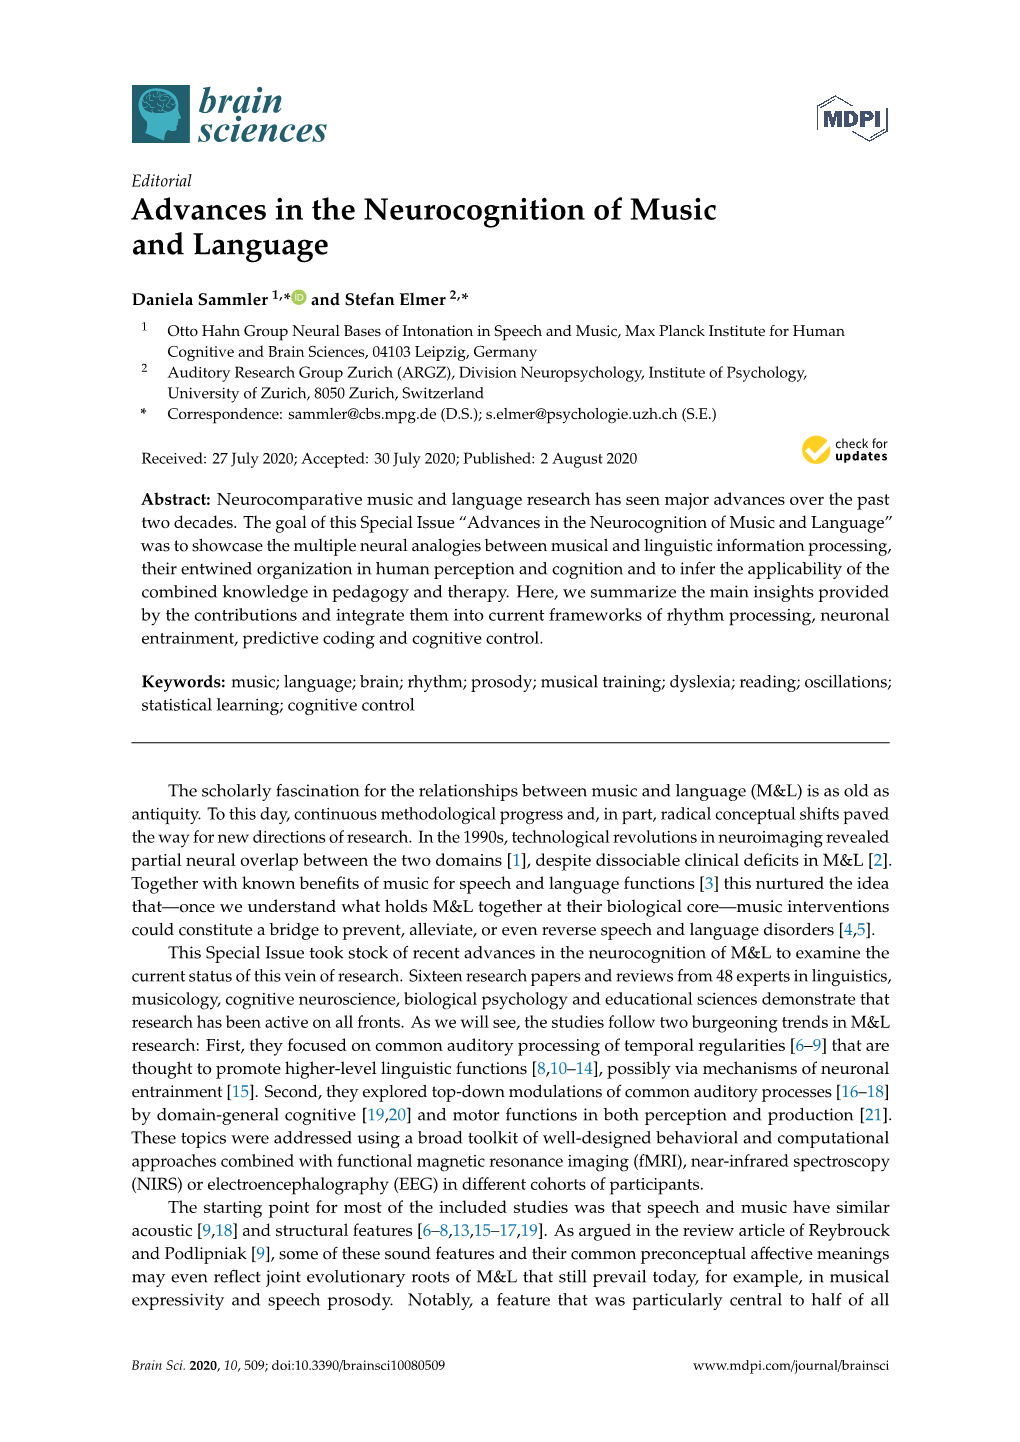 Advances in the Neurocognition of Music and Language